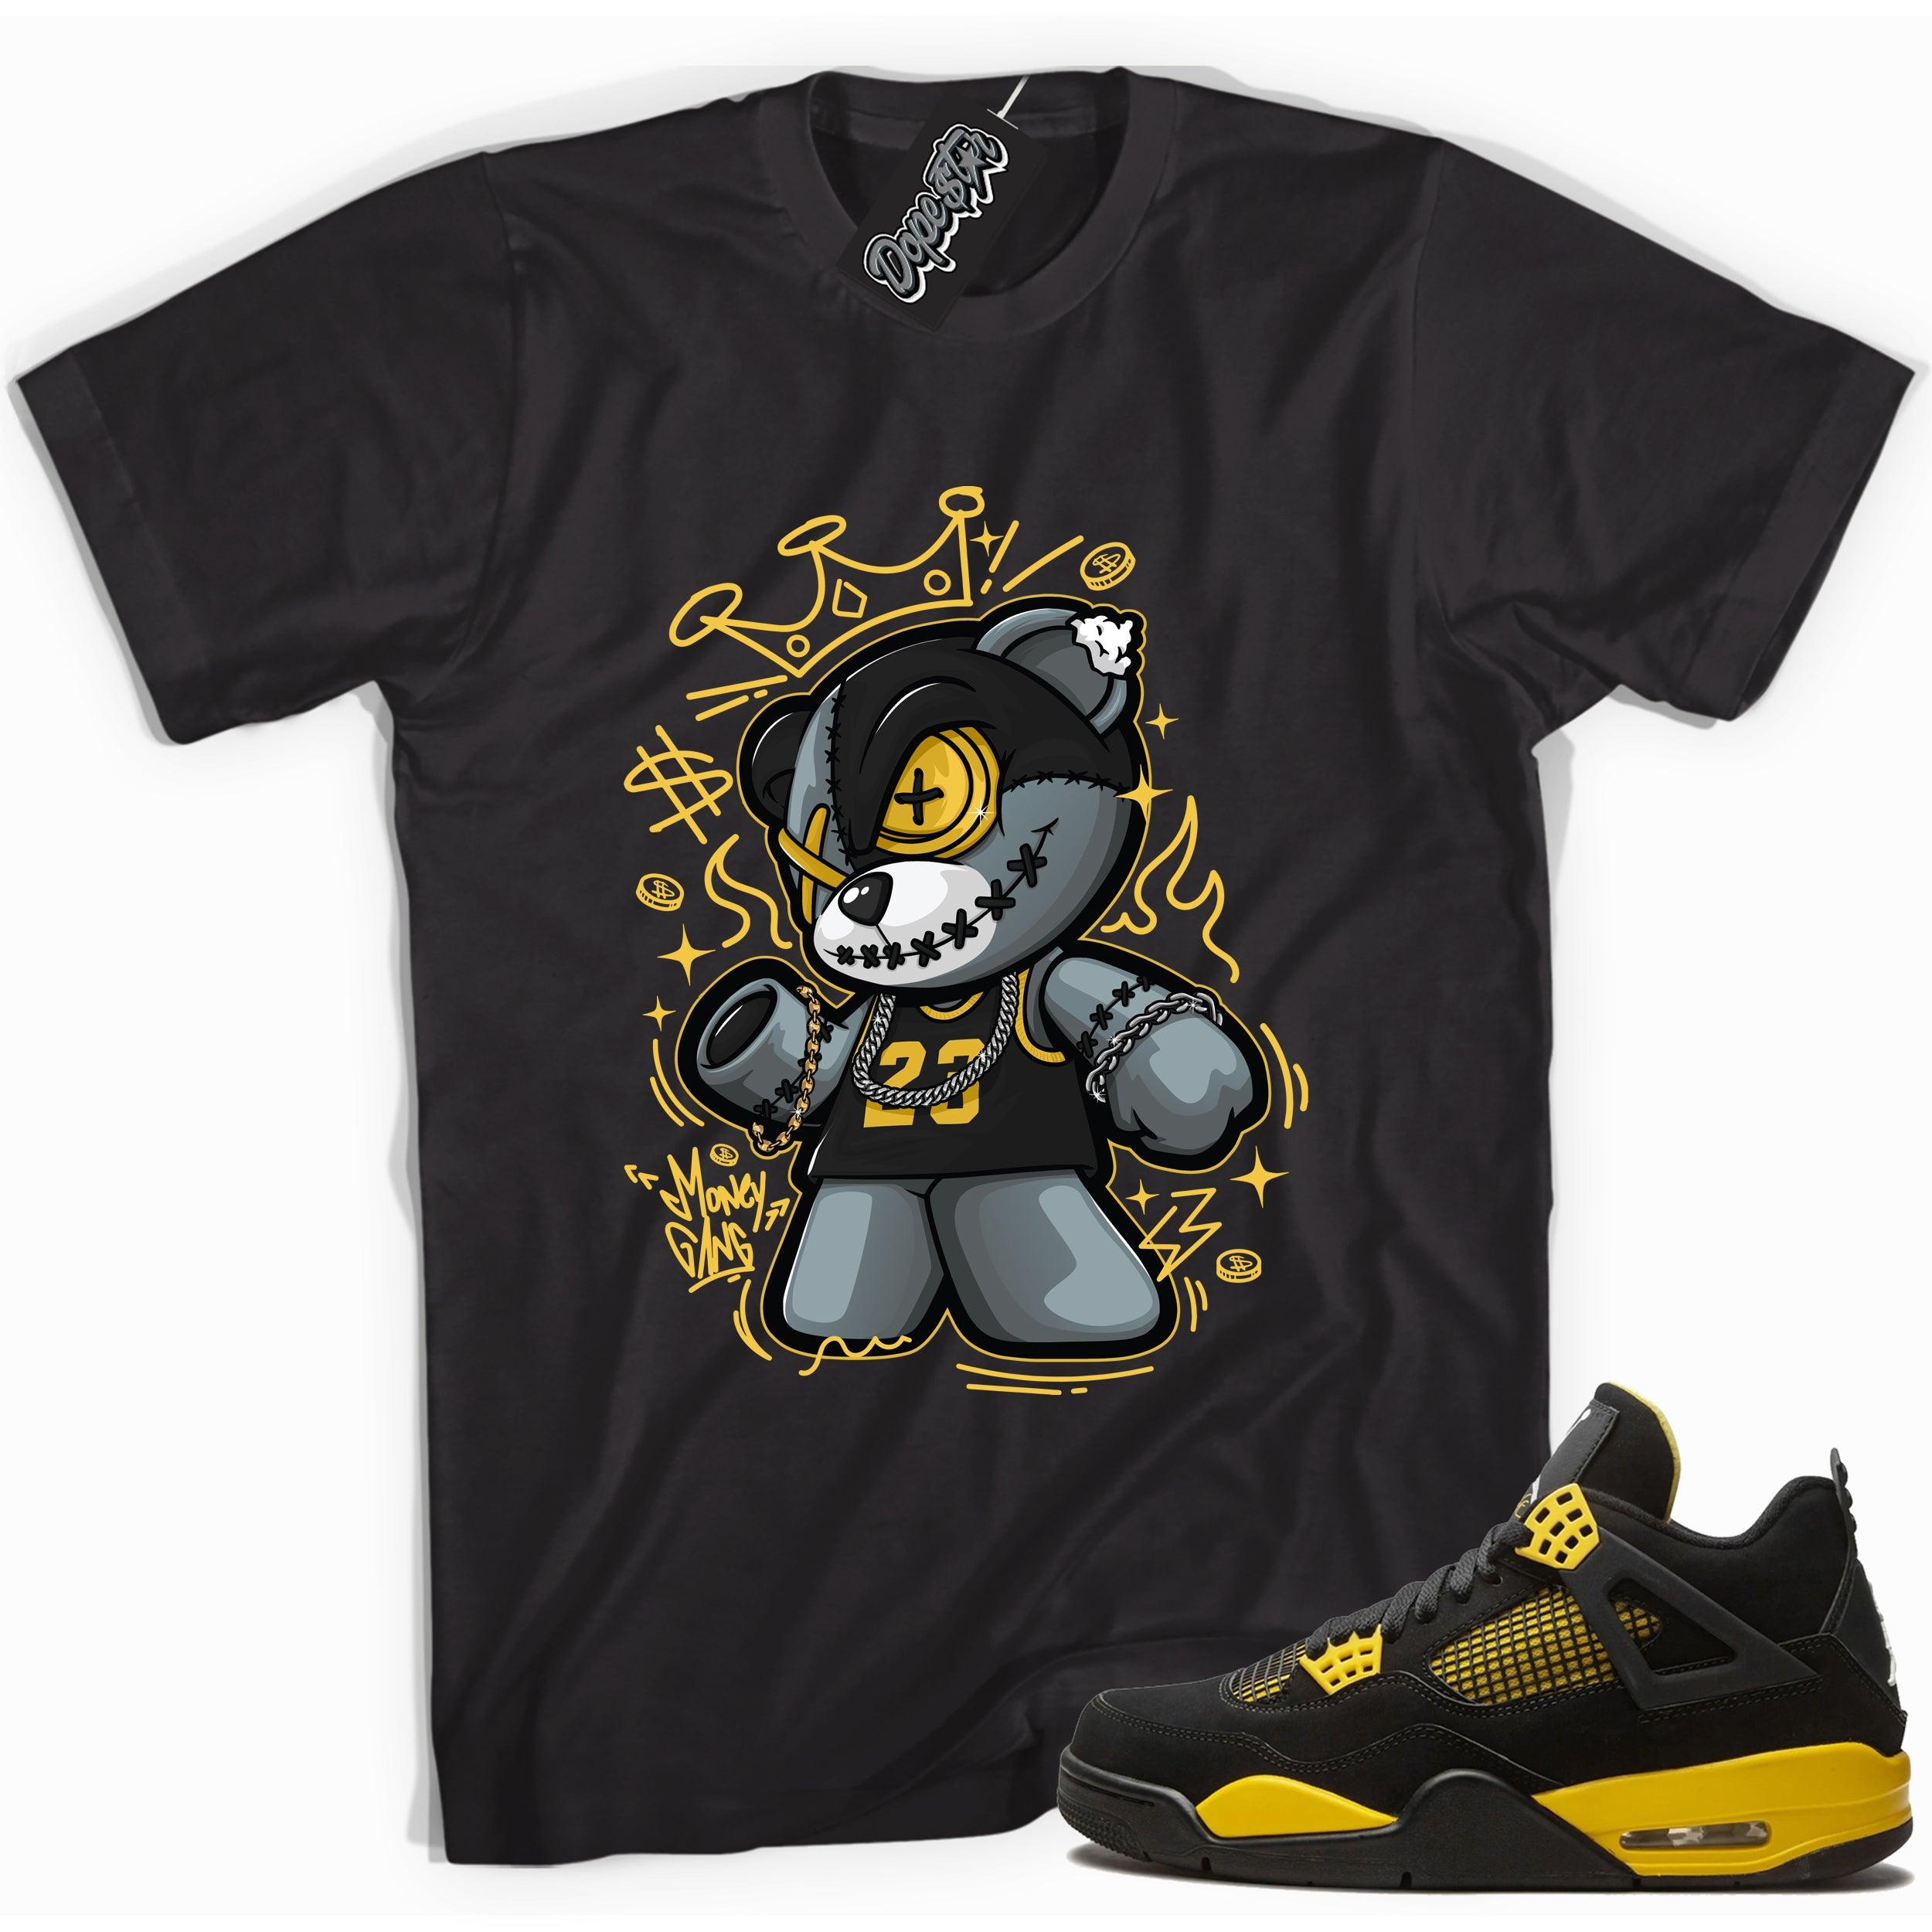 Cool black graphic tee with 'money gang bear' print, that perfectly matches  Air Jordan 4 Thunder sneakers